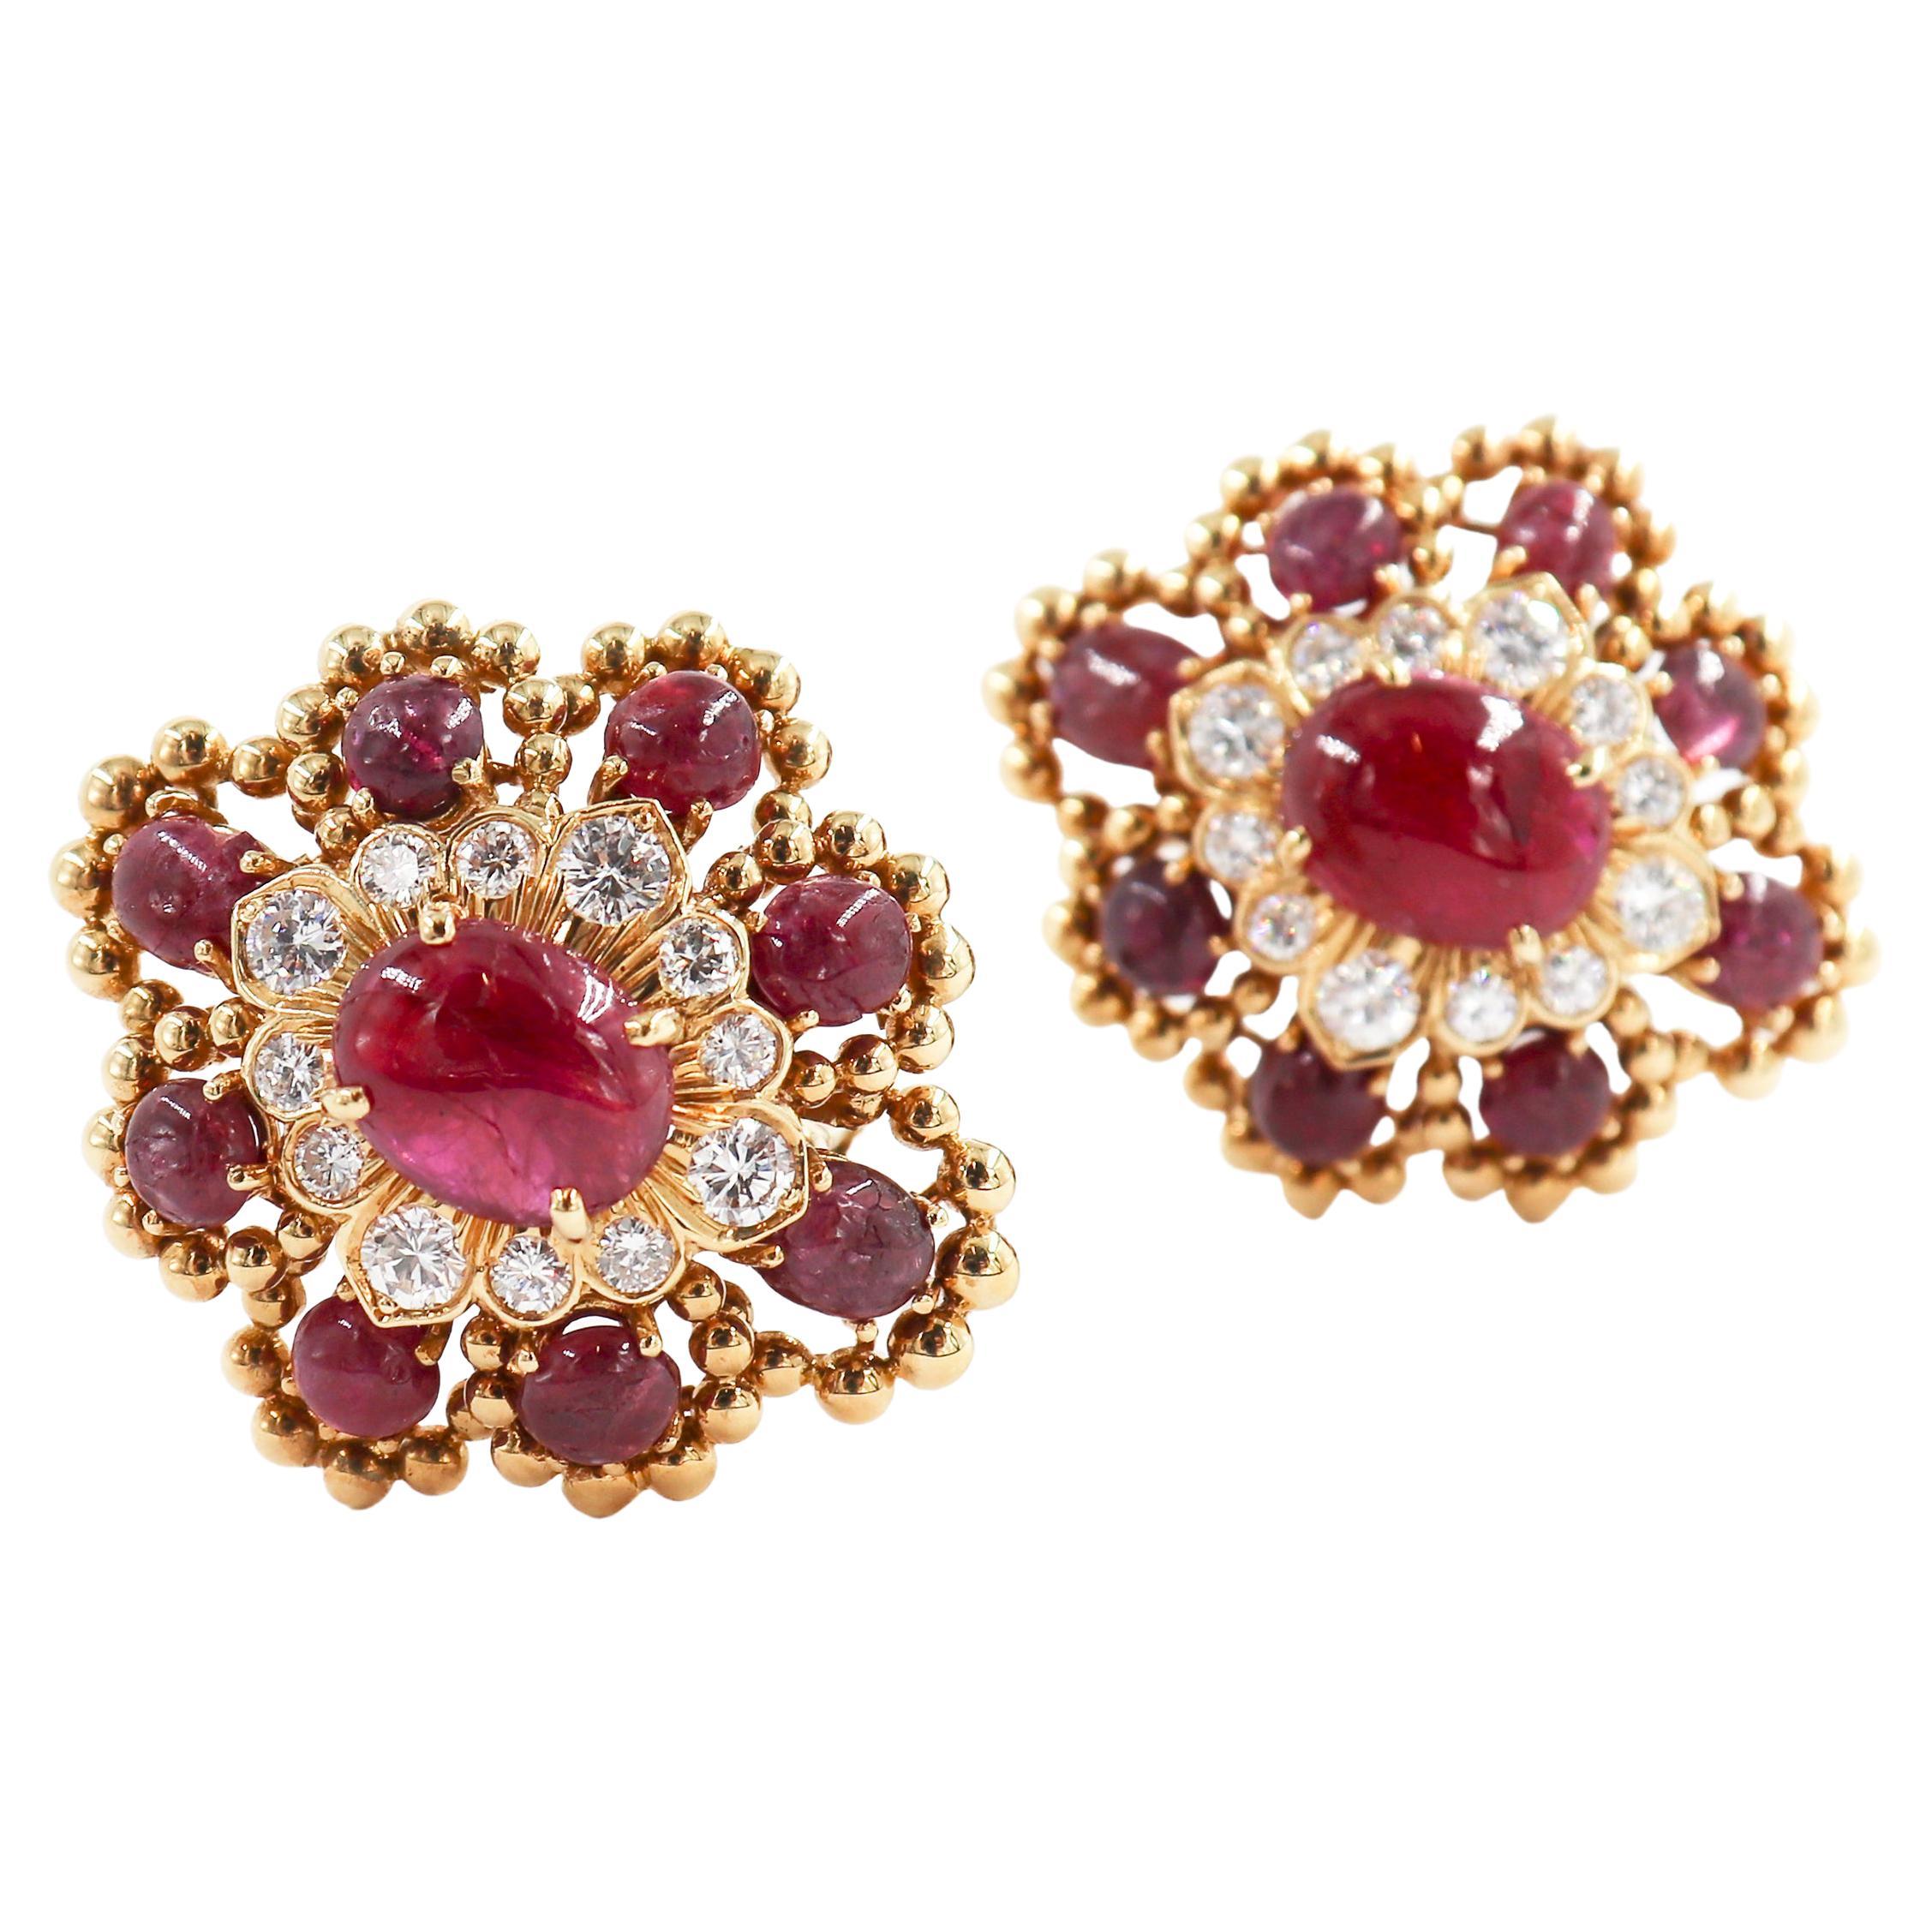 Those spectacular late 60's, early 70's David Webb clip-on Earrings crafted in 18 karat Yellow Gold, feature 9 cabochon rubies and 12 round brilliant diamonds each. 

They are each stamped 'David Webb' and '18K'.

Type: Ruby and diamond